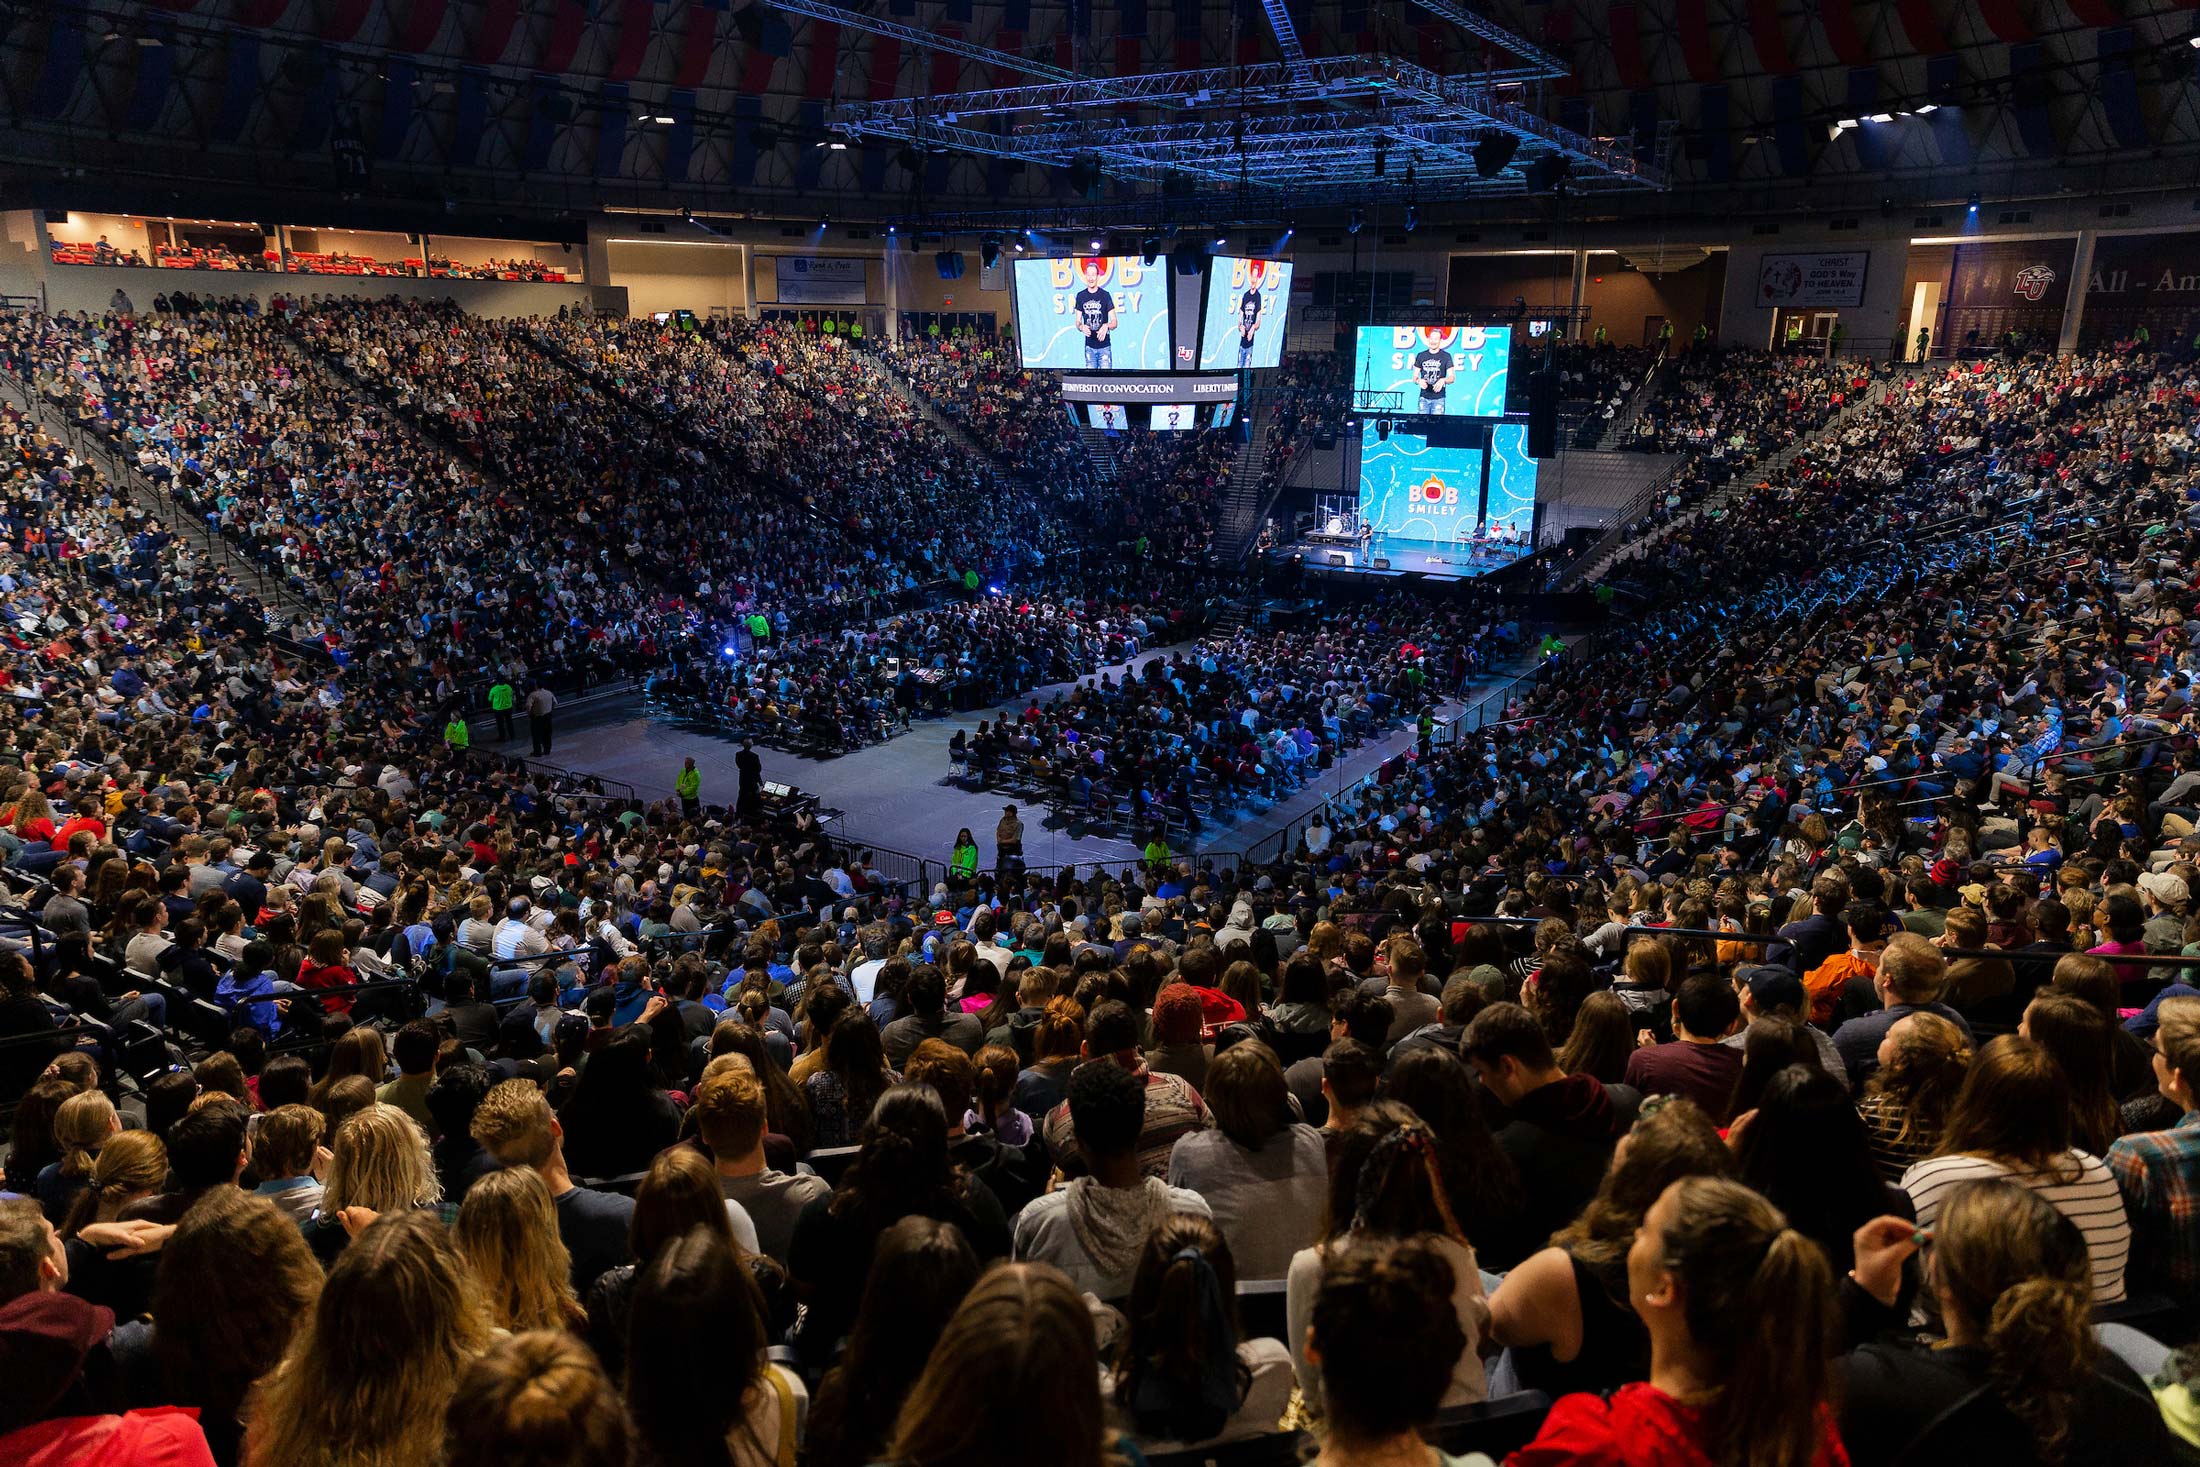 A huge arena filled with Liberty University students. Bob Smiley can be seen on the stage and on large screens in the center of the space.